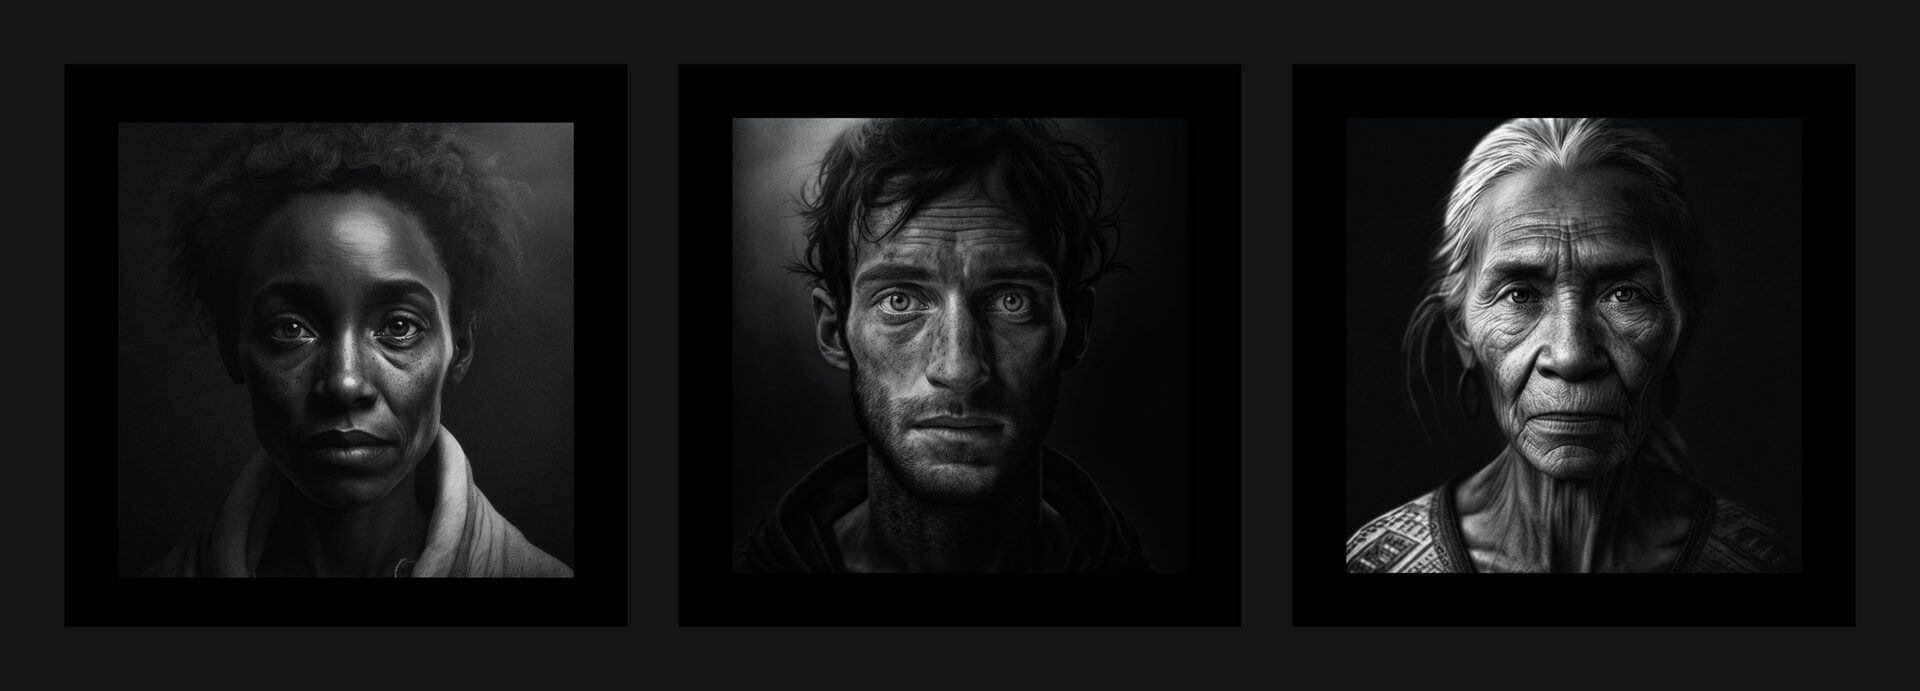 Three portraits from the online publication 500 Portraits